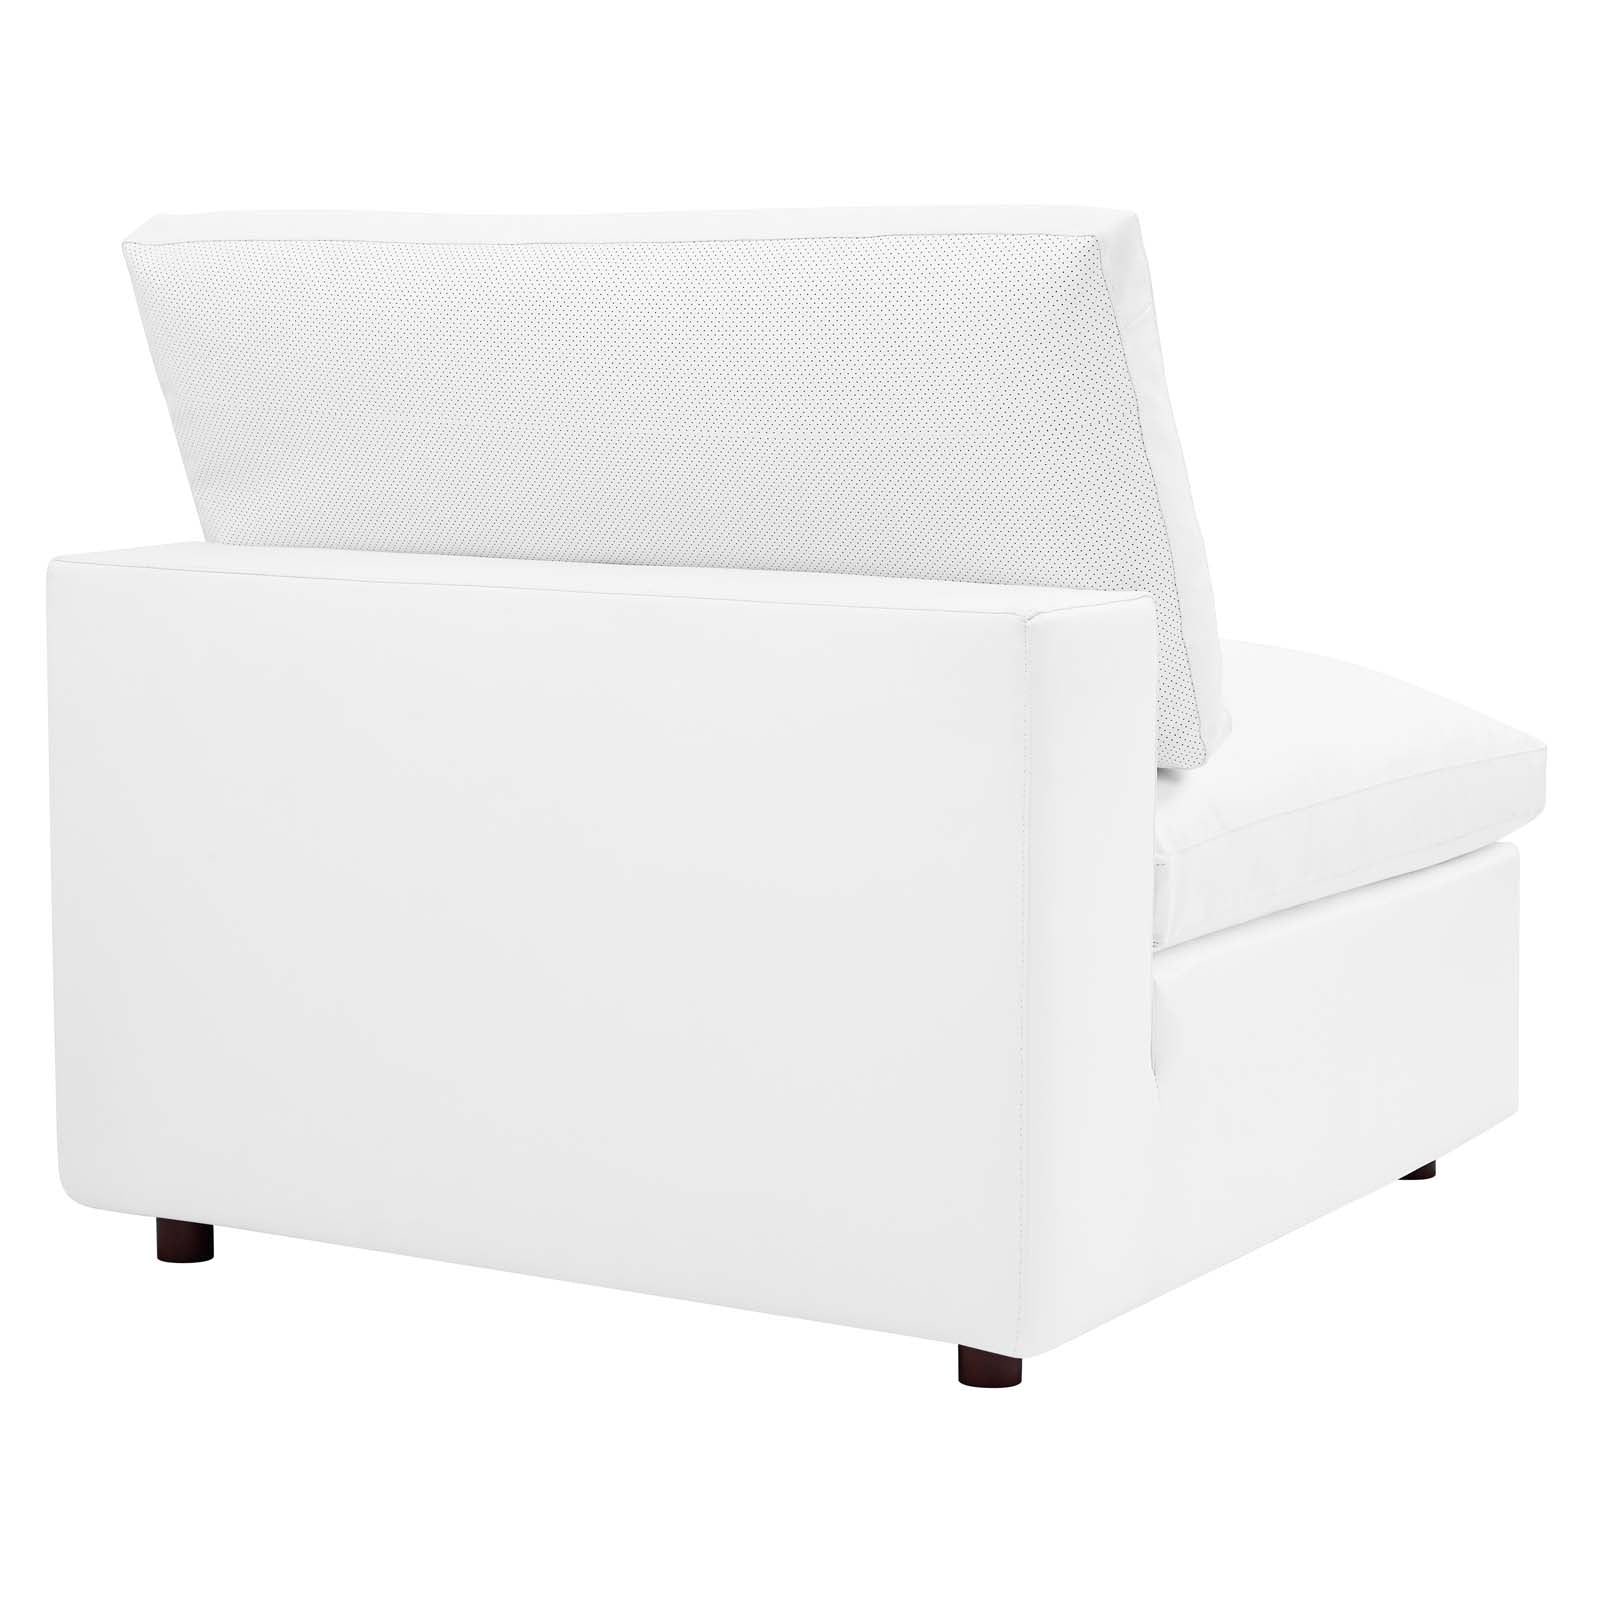 Modway Sectional Sofas - Commix Down Filled Overstuffed Vegan Leather 8 Piece Sectional Sofa White